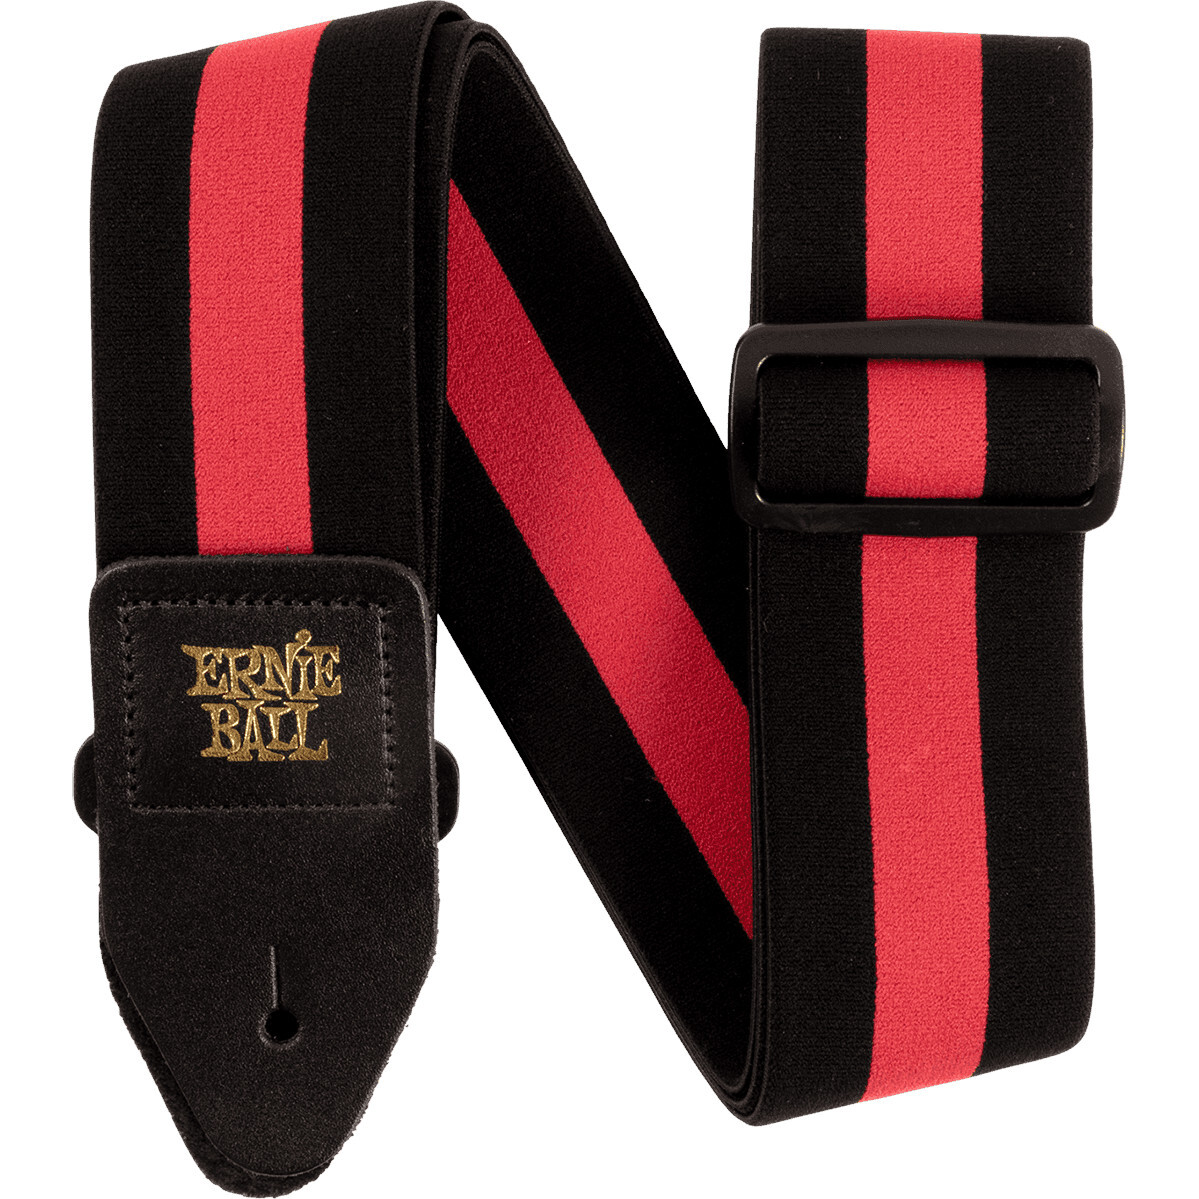 Ernie Ball Stretch Comfort Strap 5329 Racer Red